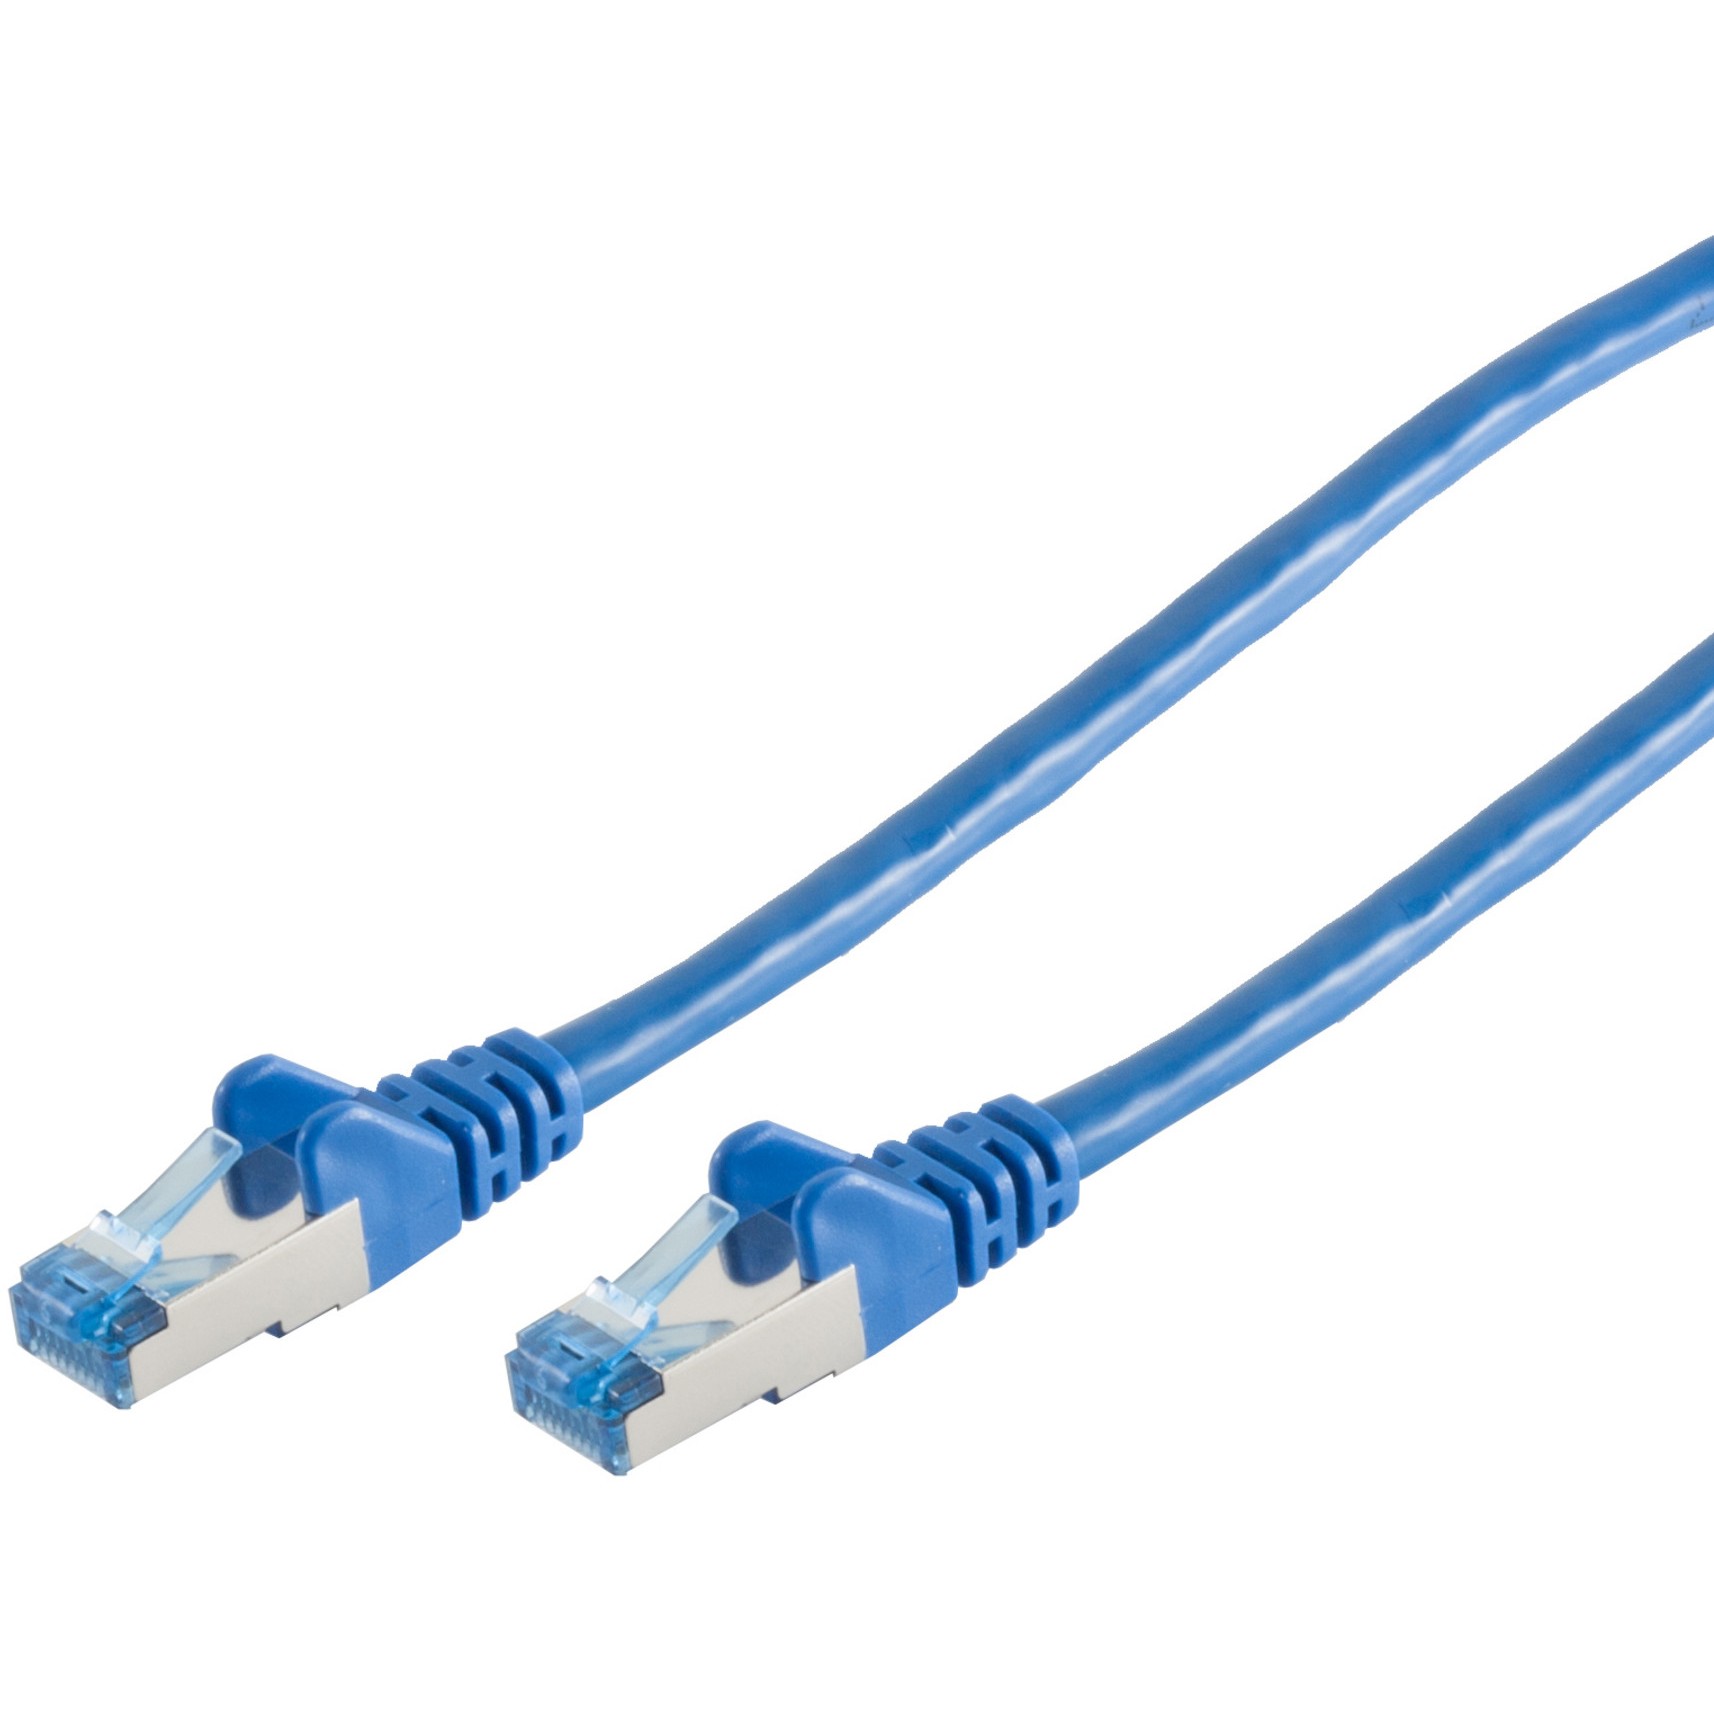 S-Conn 75715-B networking cable - 75715-B